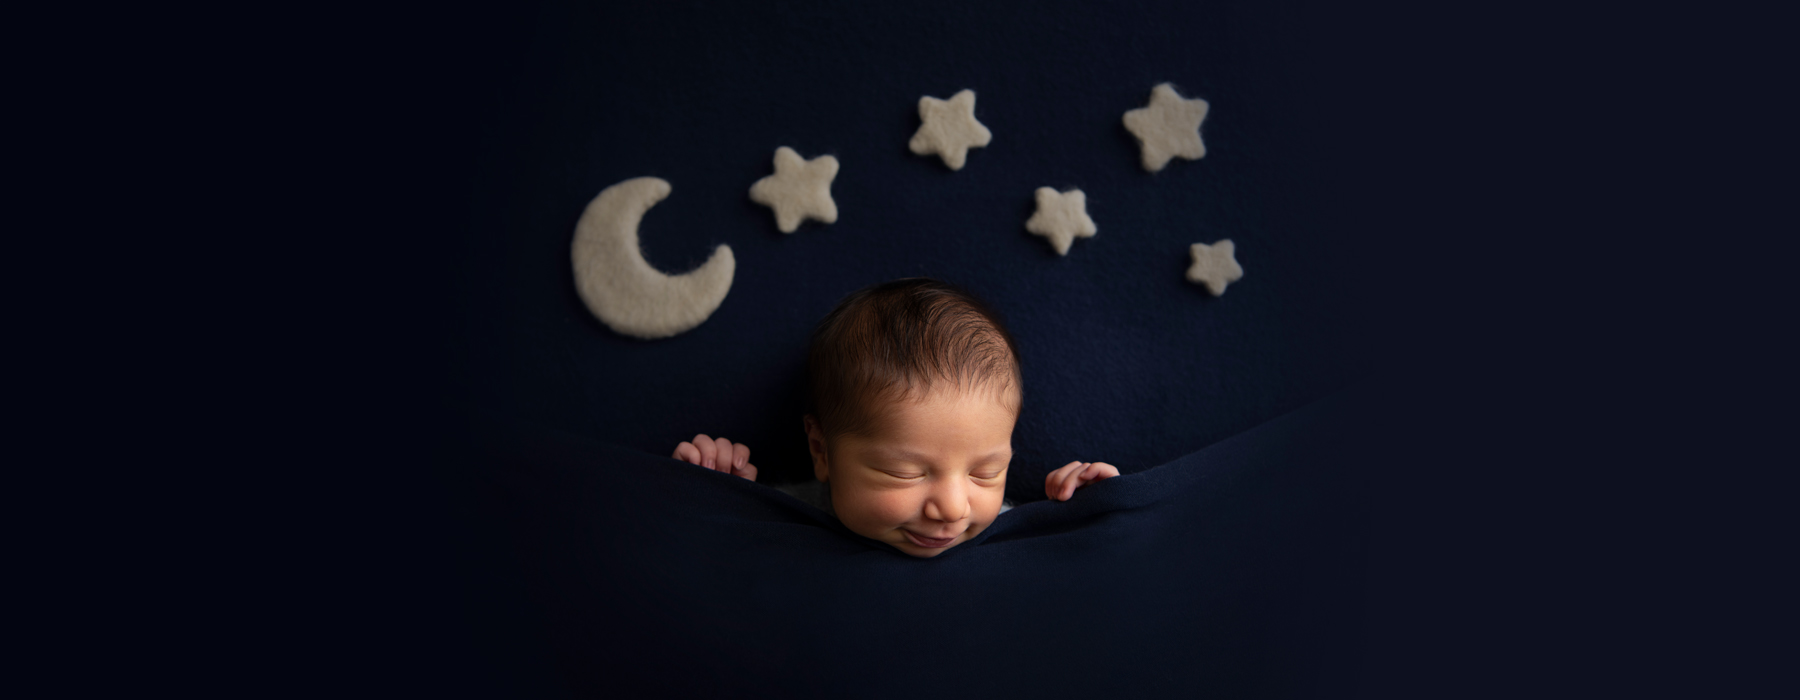 Best Gear for Newborn Photography – G-Master Your Lenses